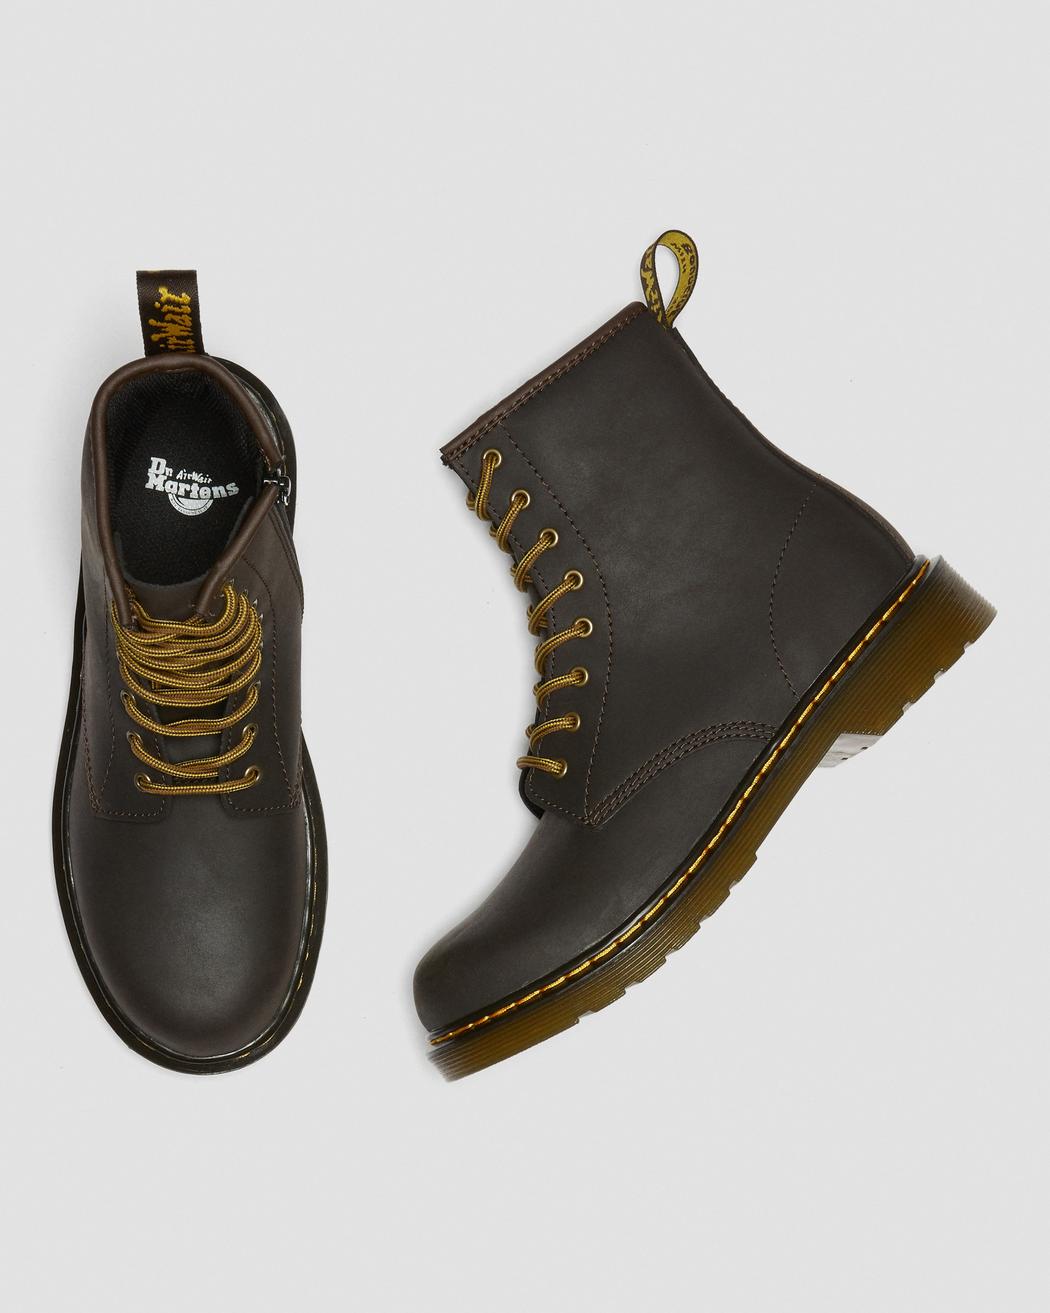 Youth 1460 Wildhorse Leather Lace Up Boots | Dr. Martens